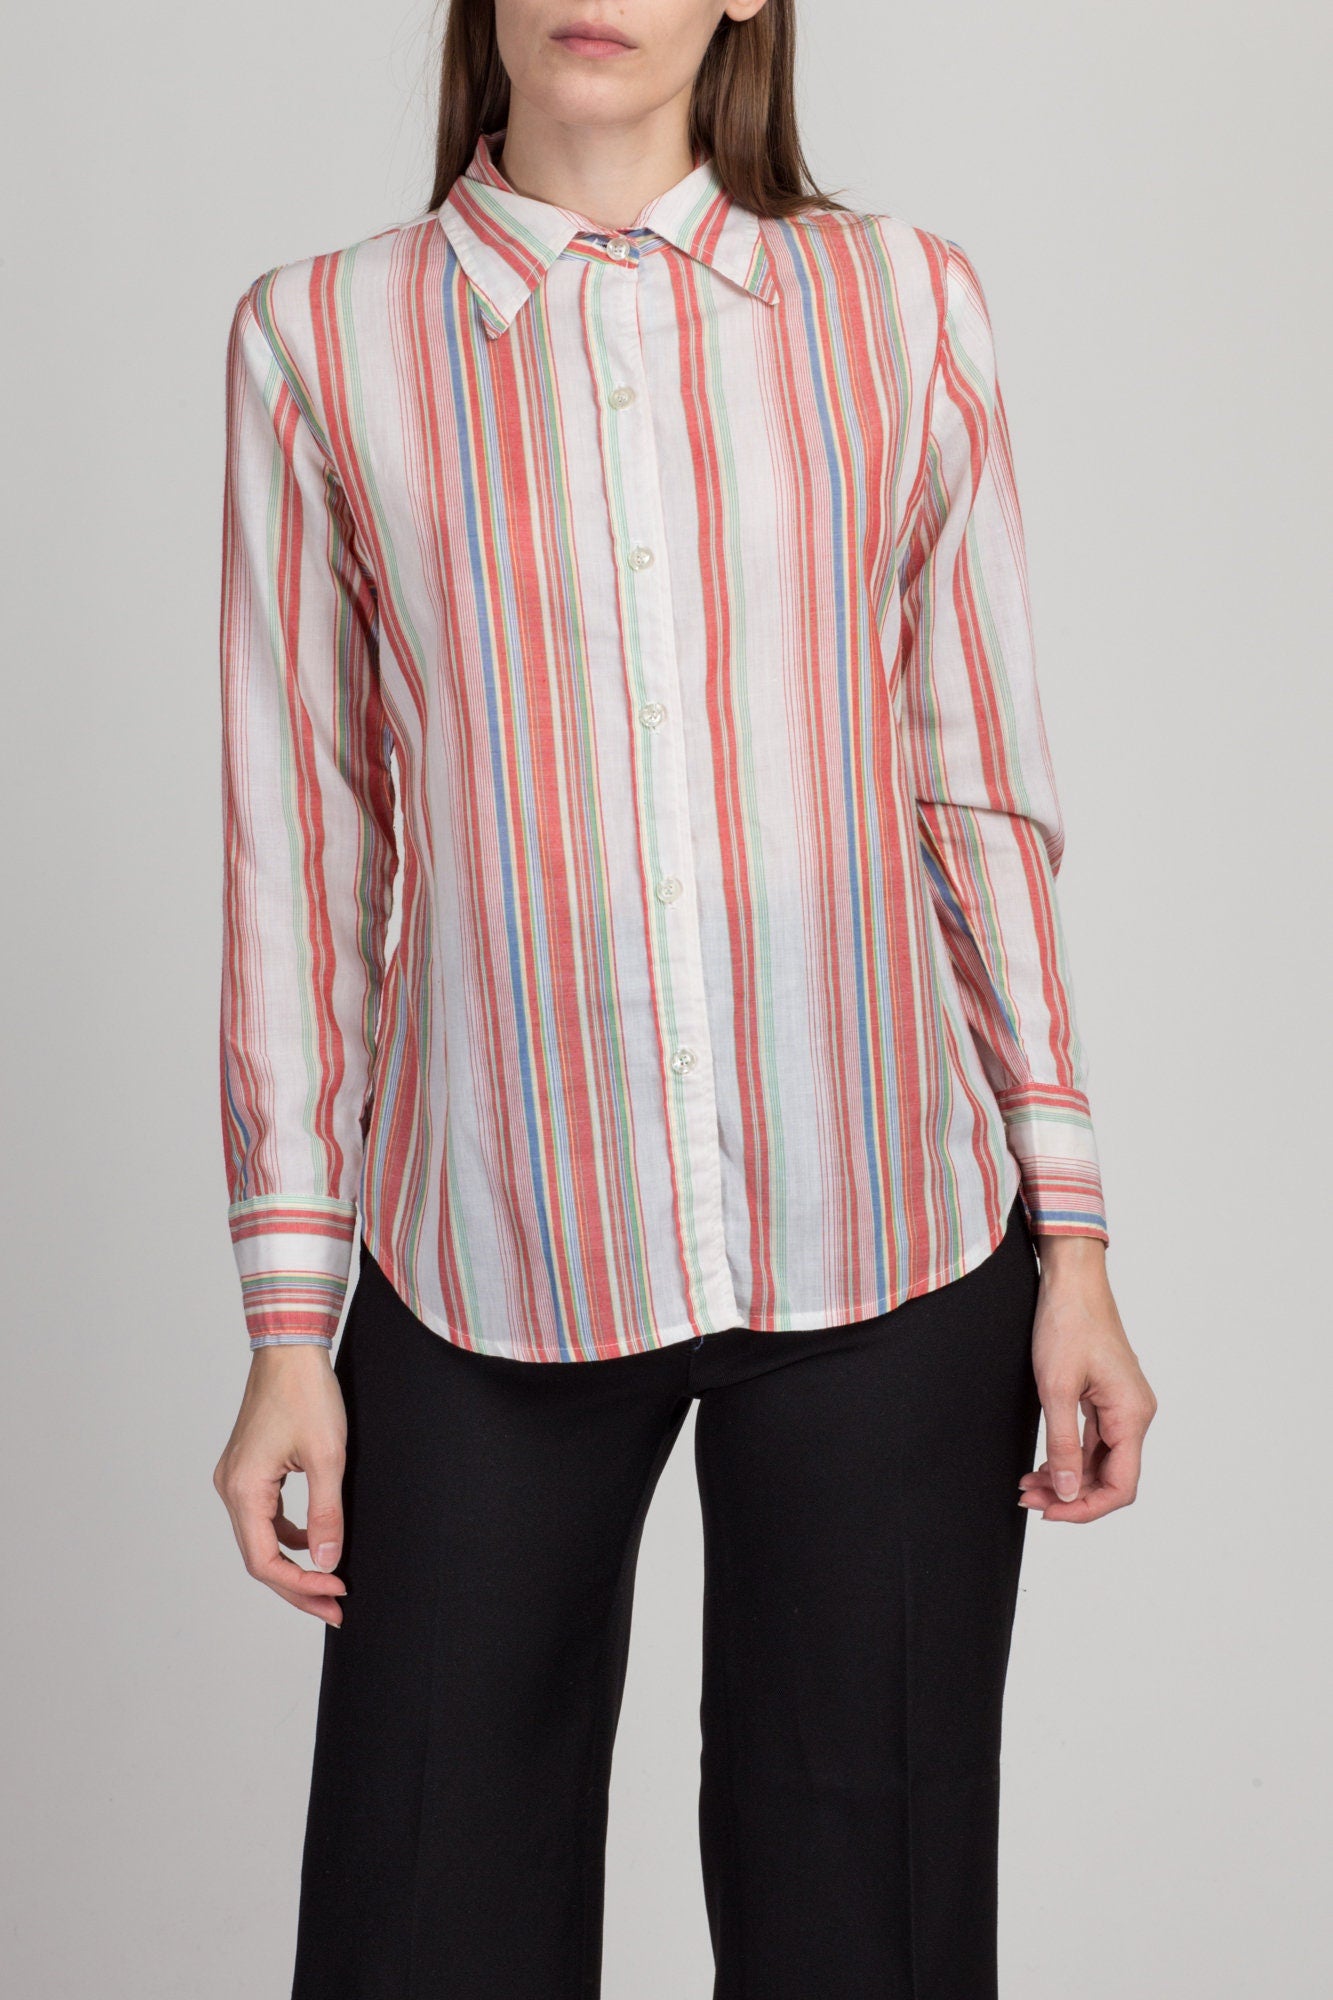 70s Candy Striped Button Up Top - Small 